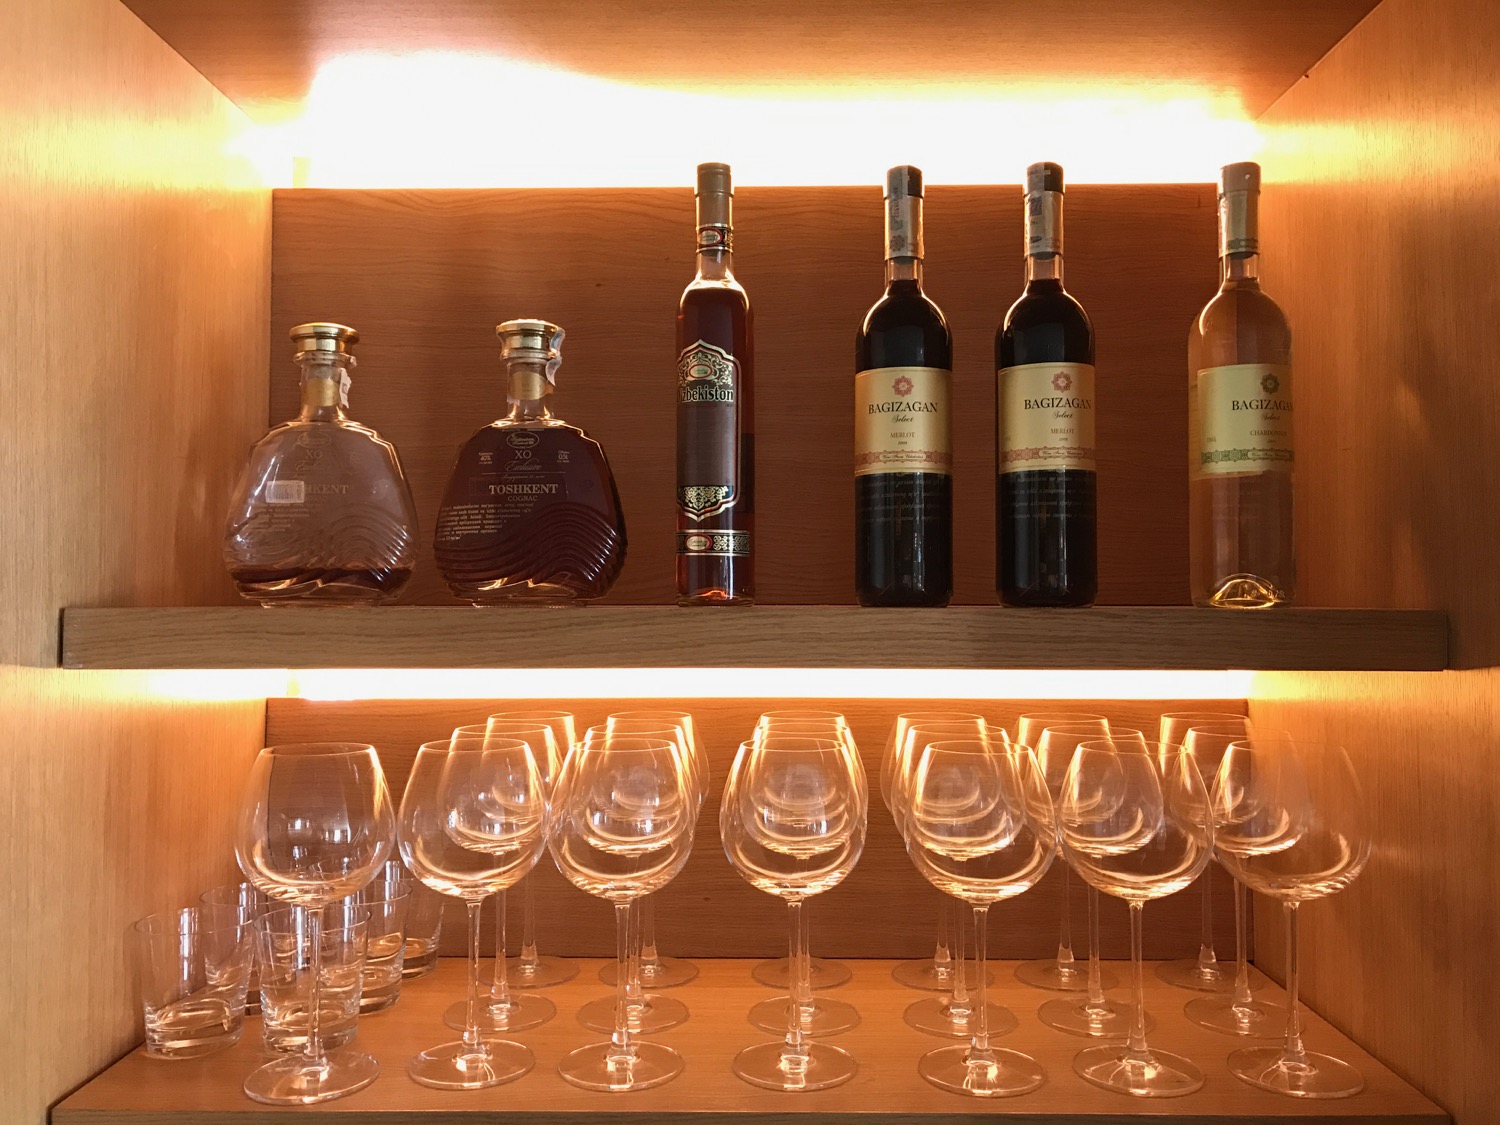 a shelf with wine bottles and glasses